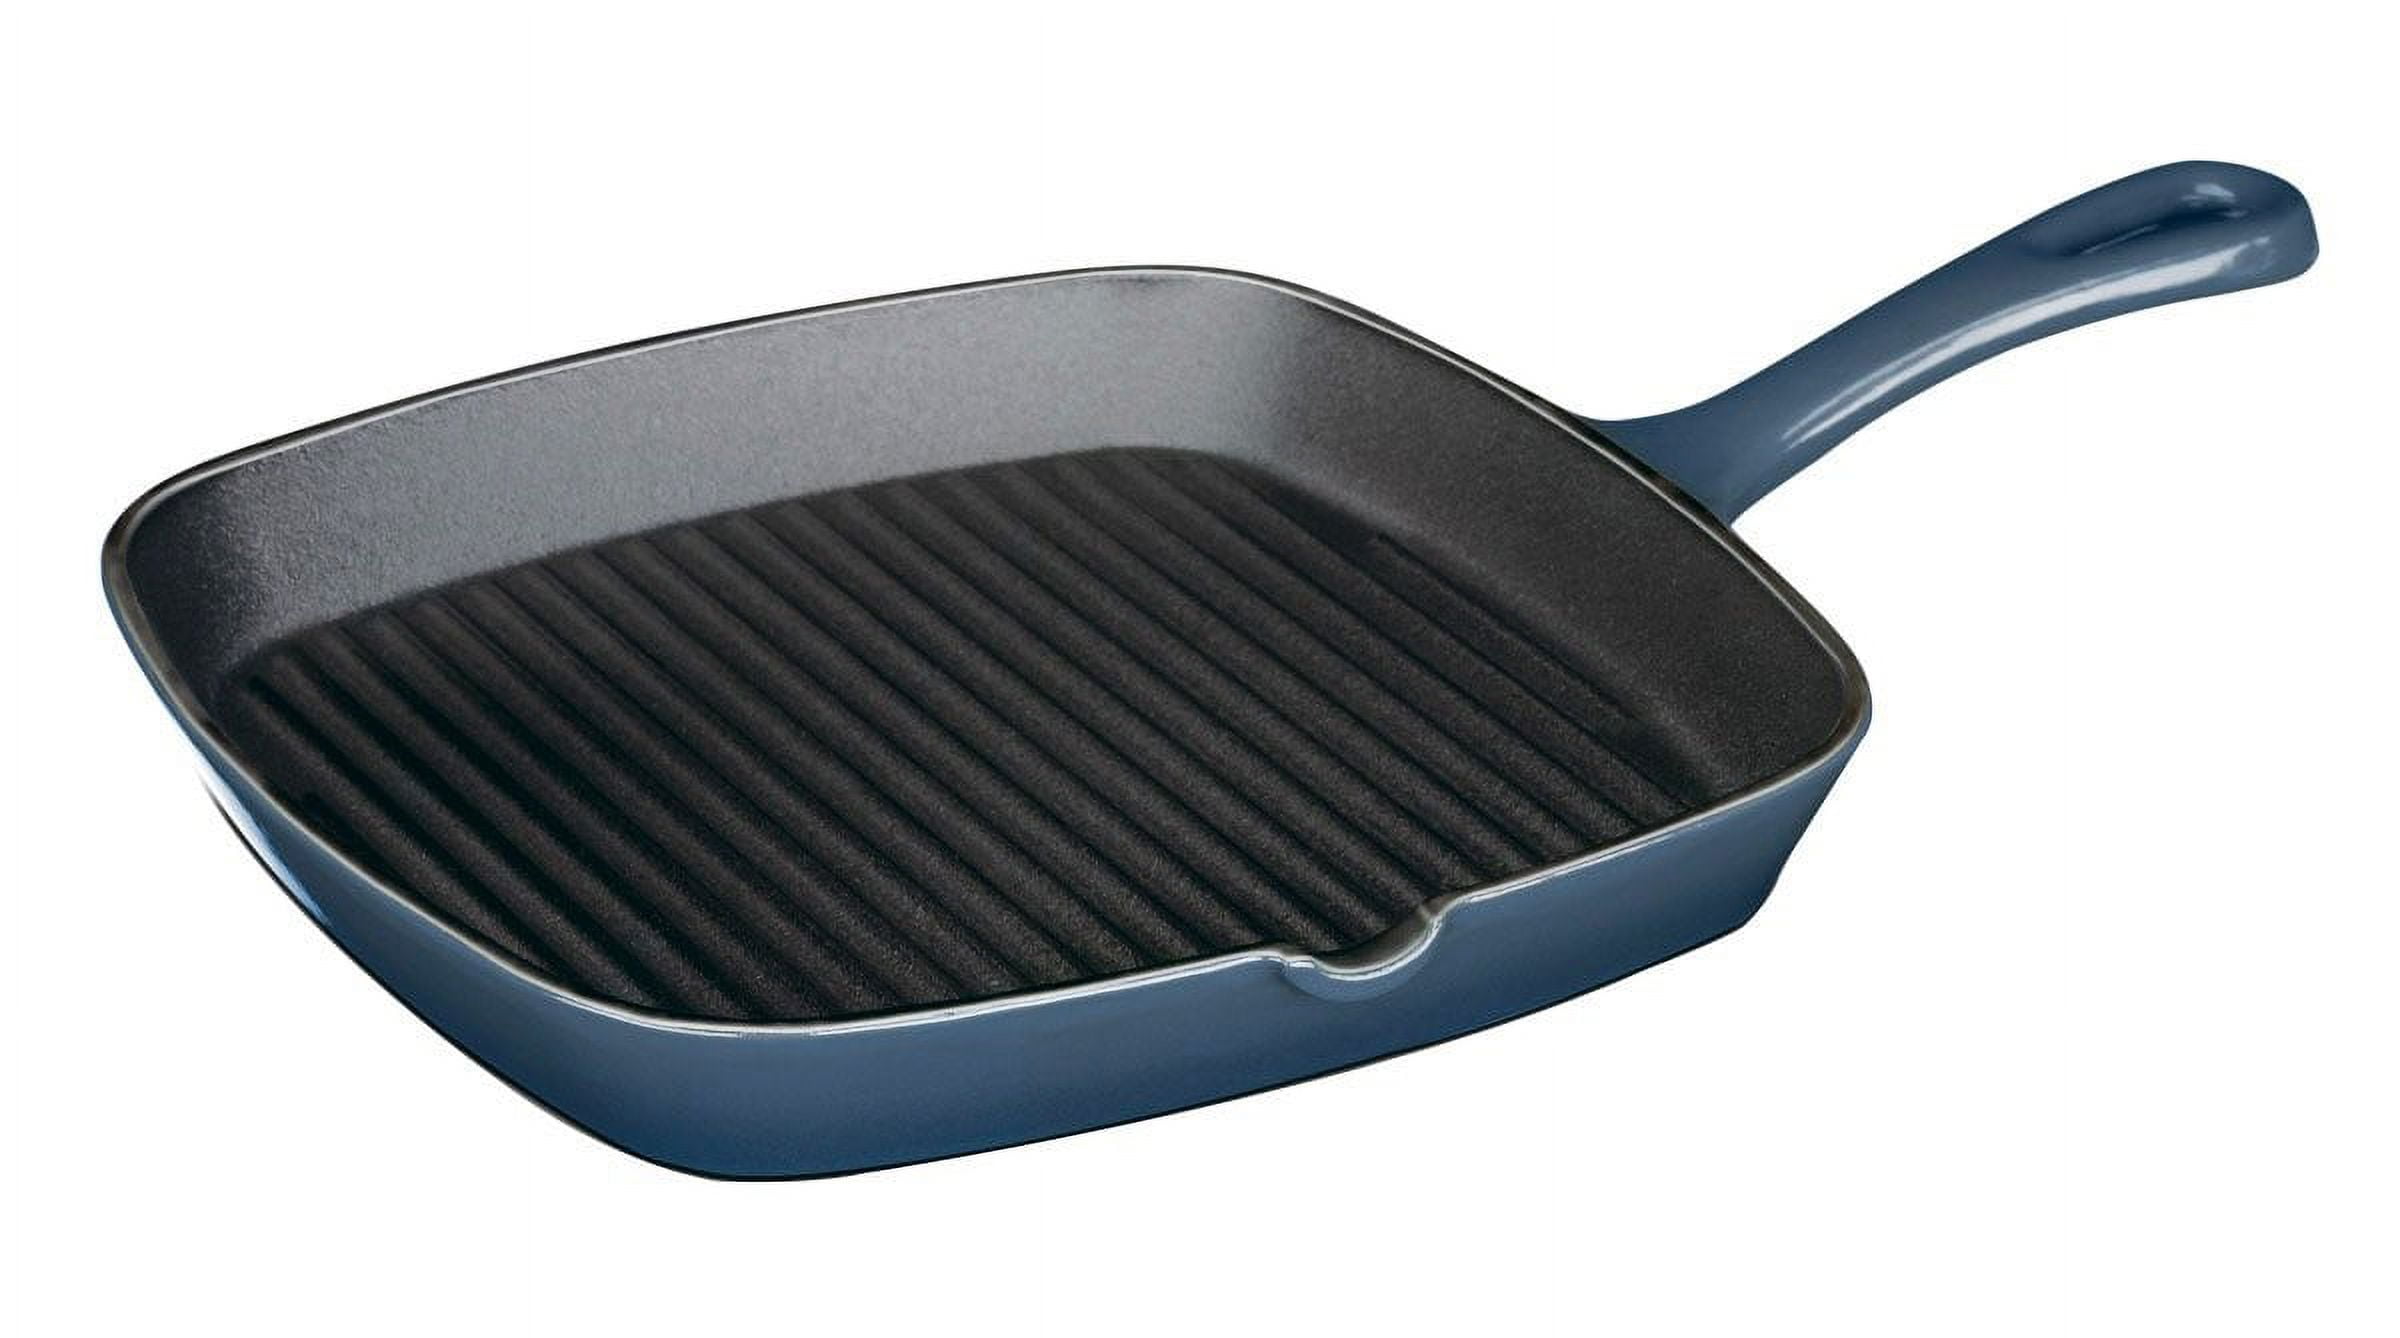 Cuisinart Enameled Cast Iron Grill Pan Review: A Great Grill Alternative